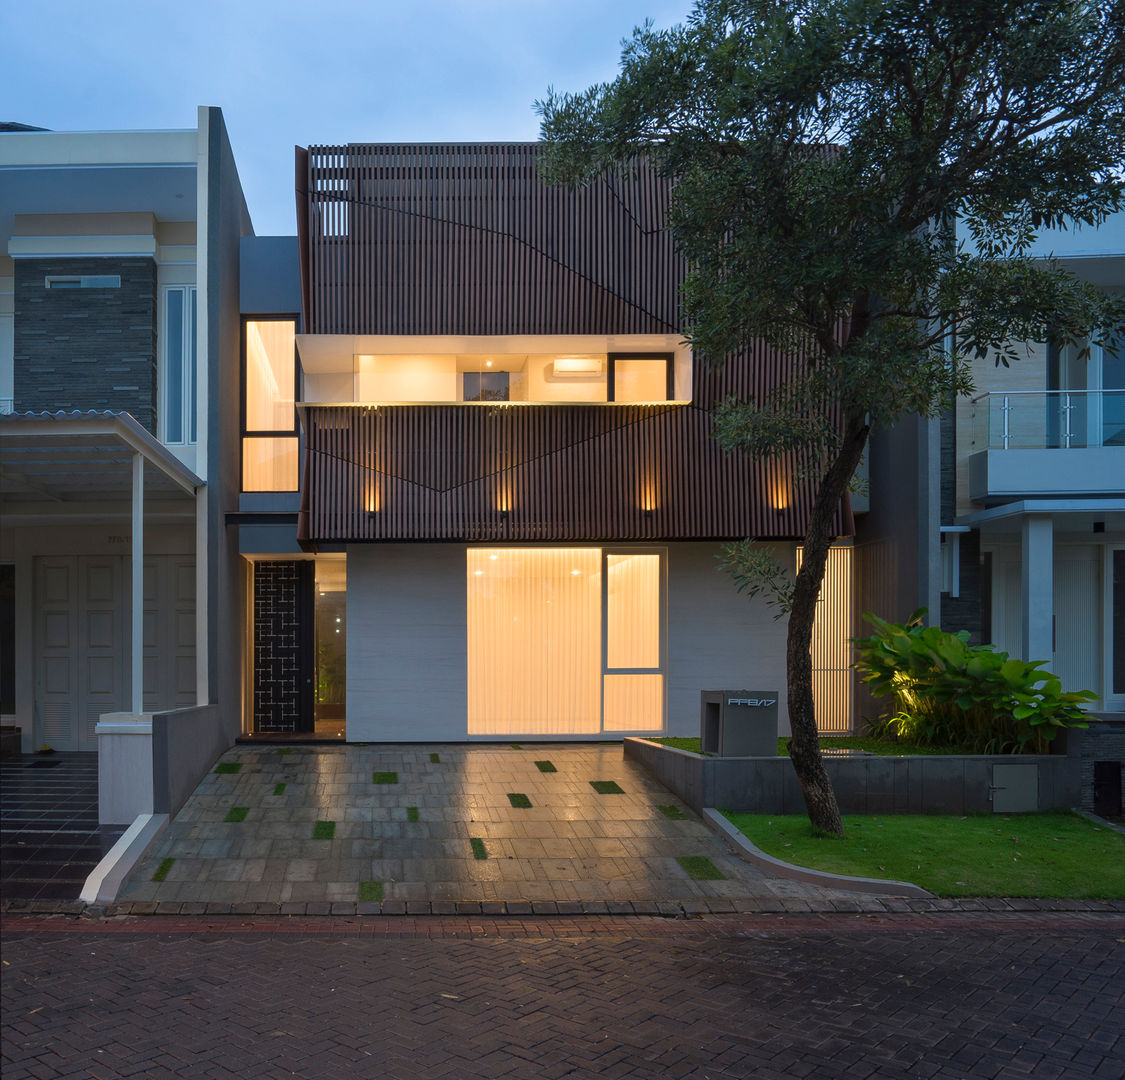 'S' house, Simple Projects Architecture Simple Projects Architecture บ้านและที่อยู่อาศัย เหล็ก